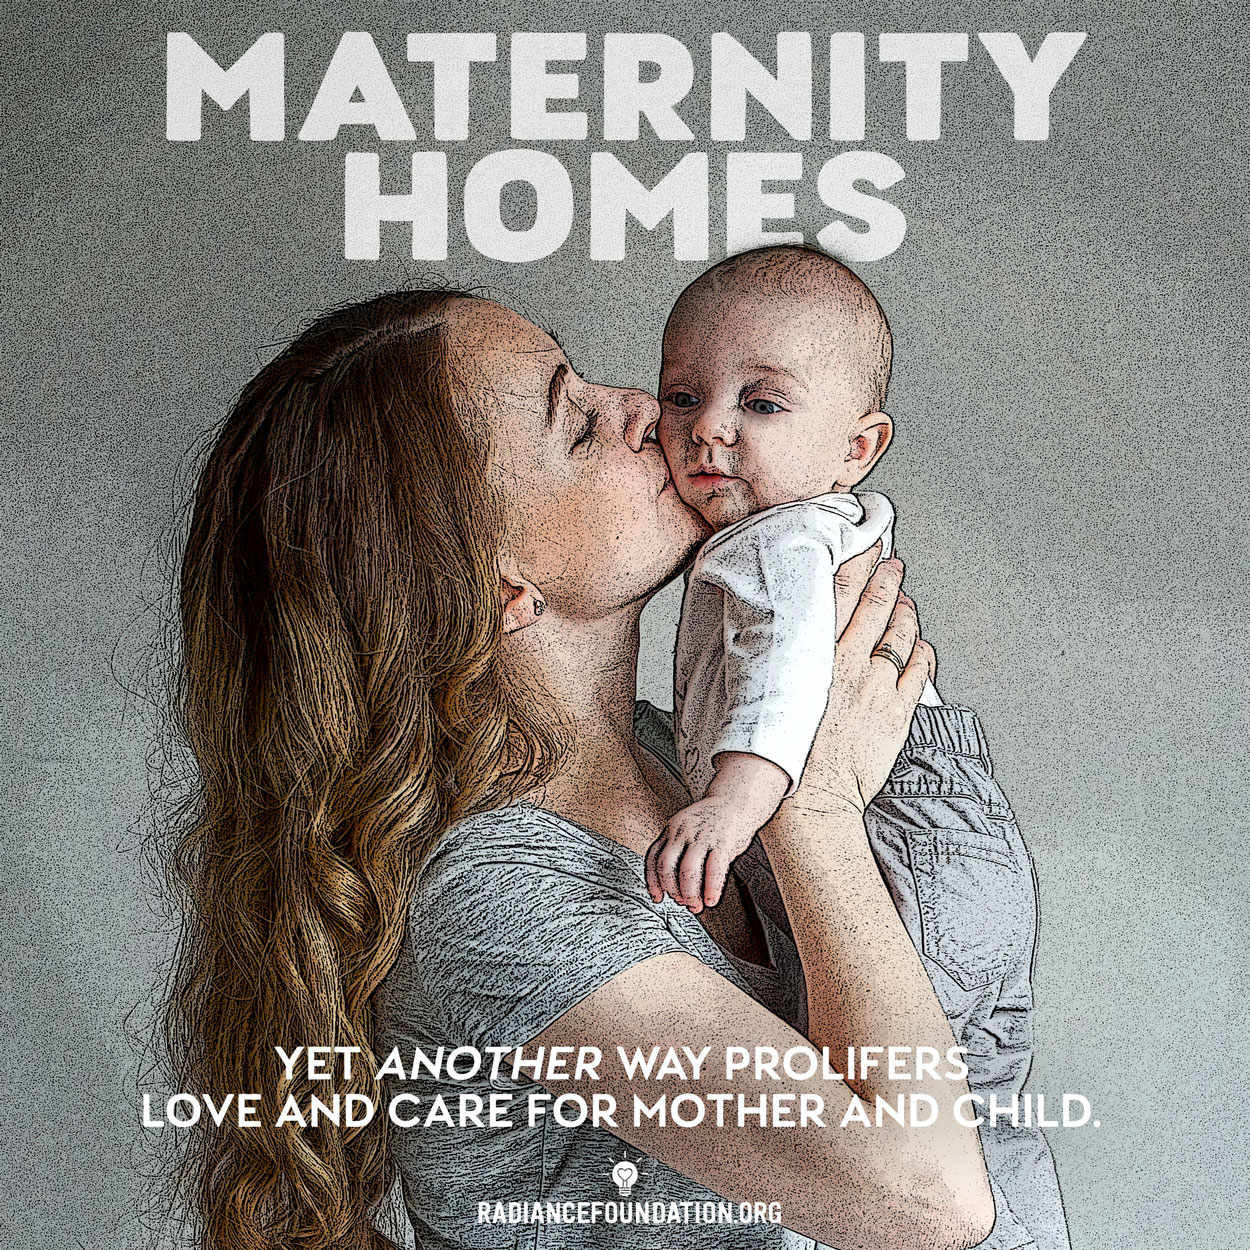 "Maternity Homes" by Radiance Foundation